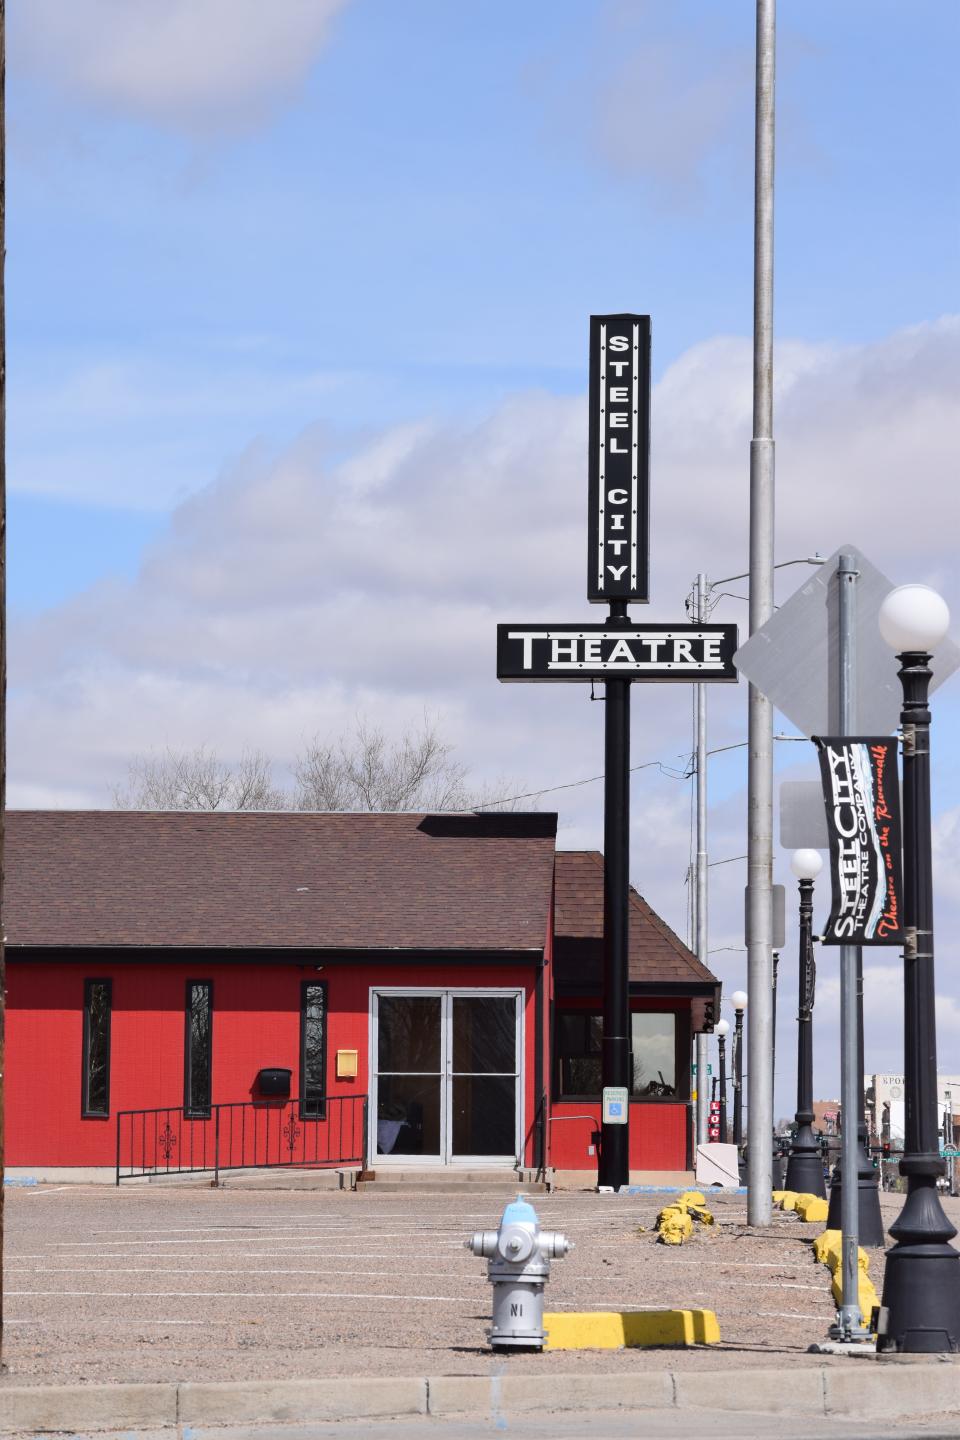 Steel City Theatre company will soon be leaving its longtime home in the former Patti's Restaurant to relocate to the old Chief Theater.